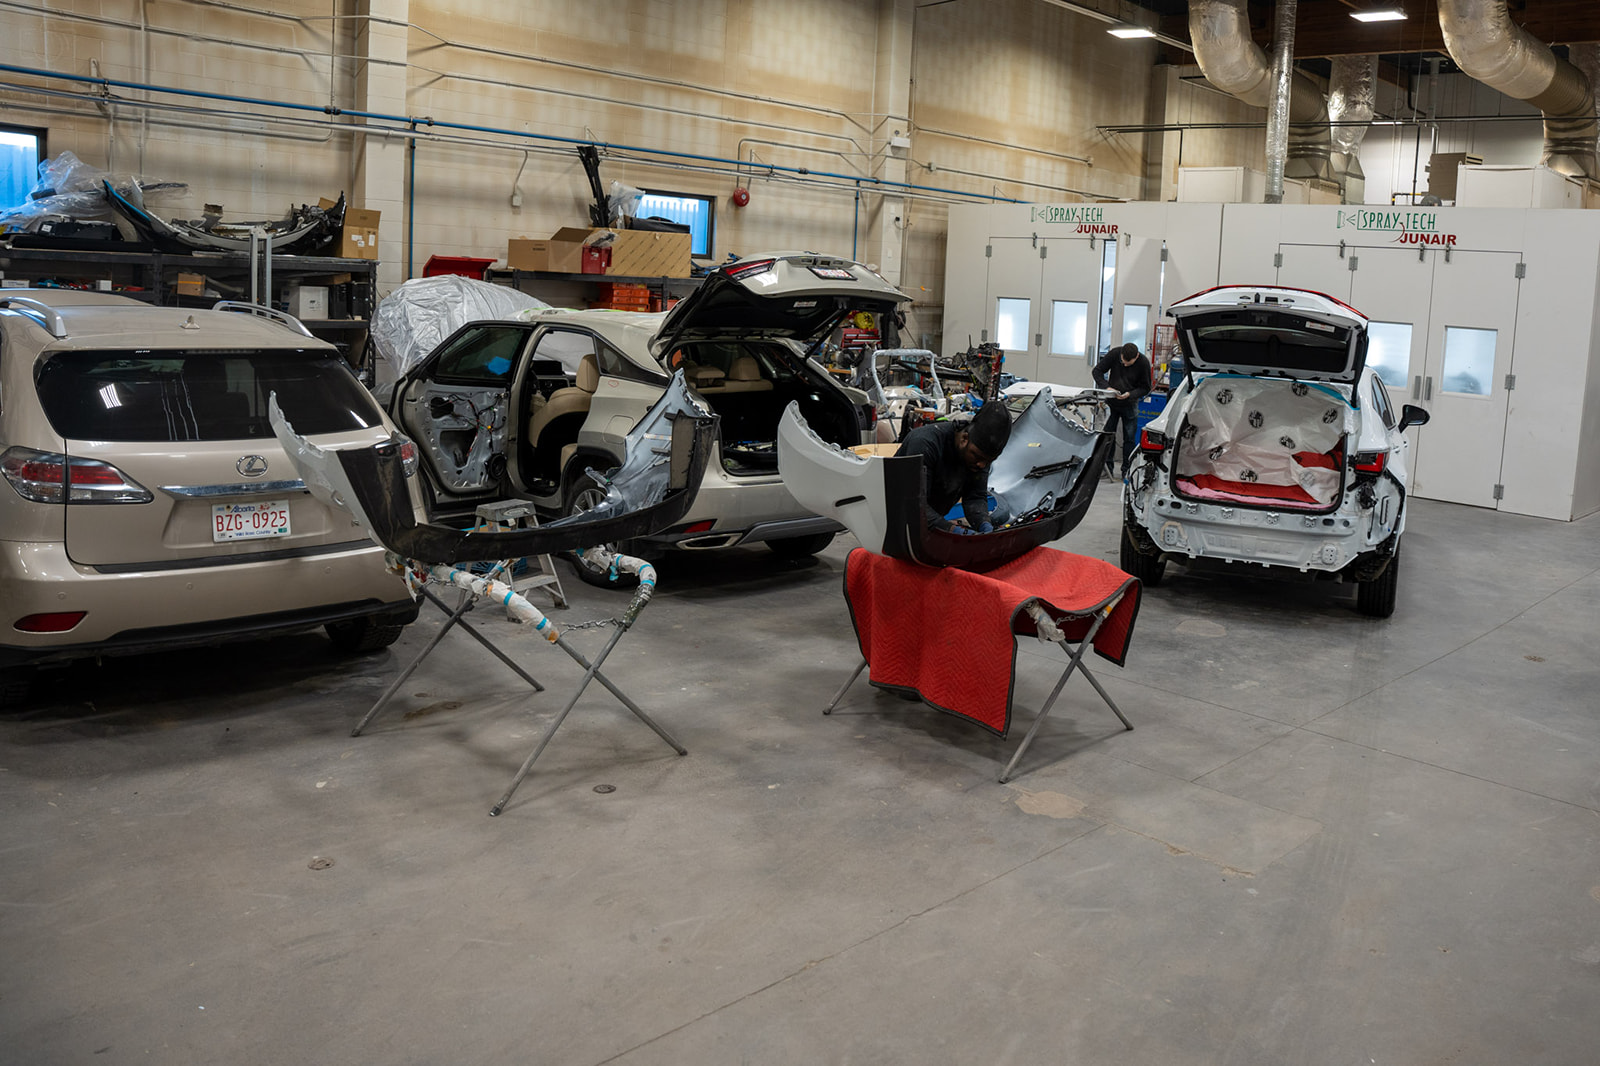 ​Locally Owned and Operated, Serving in Autobody Northwest Edmonton for Years